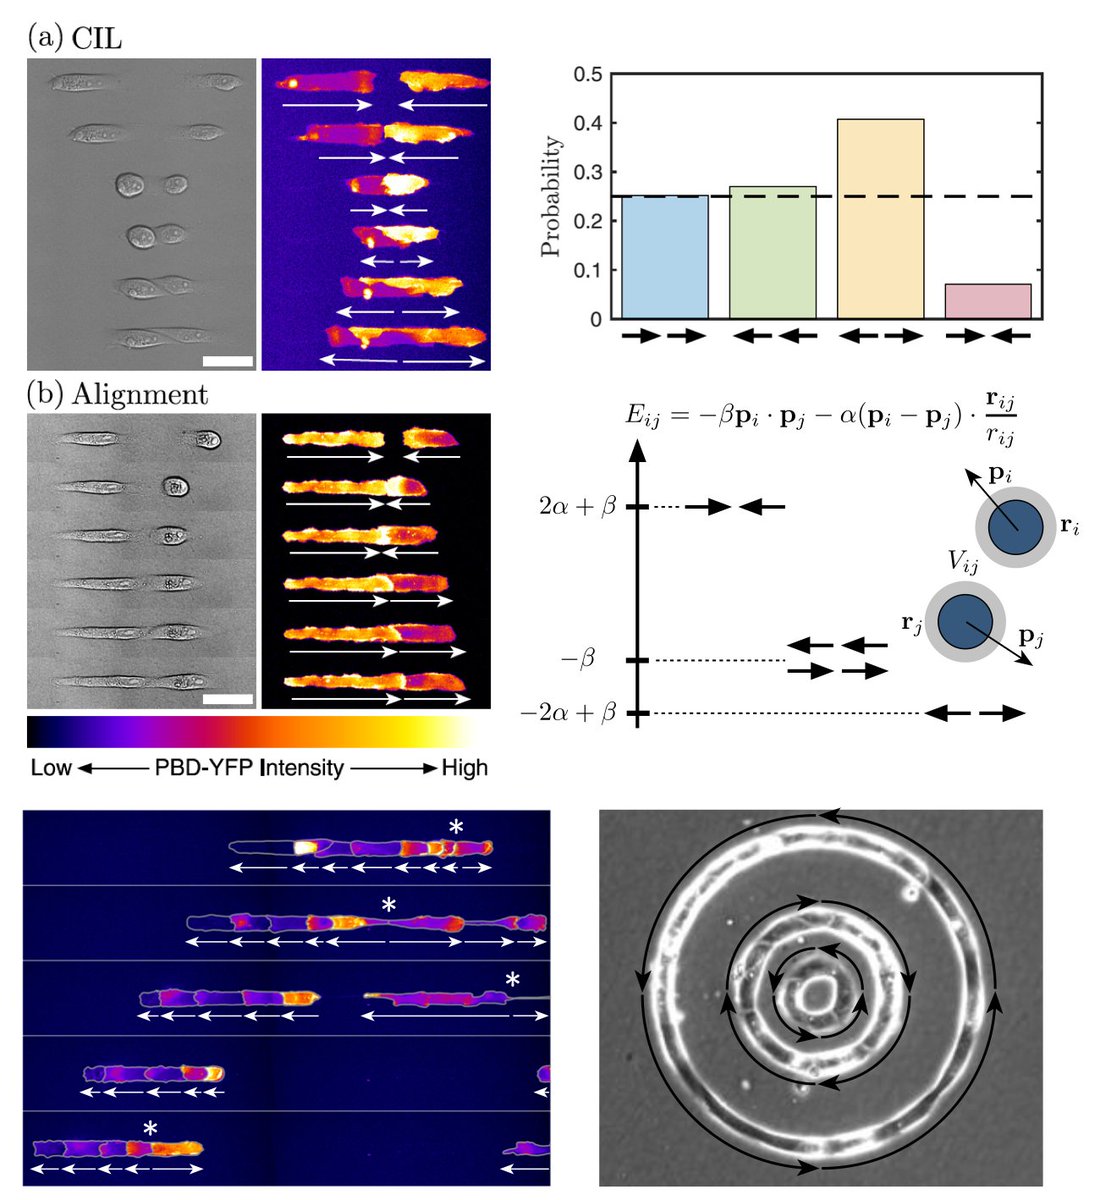 Clustering and ordering in cell assemblies with generic asymmetric aligning interactions, Thibault Bertrand et al @bertrand_thibo @ImperialMaths @ICPhysicsoflife @BLadoux @IJMonod @labexWhoamI @LaboJeanPerrin #SoftMatter #Biophysics #StatisticalPhysics go.aps.org/3xsxcK8